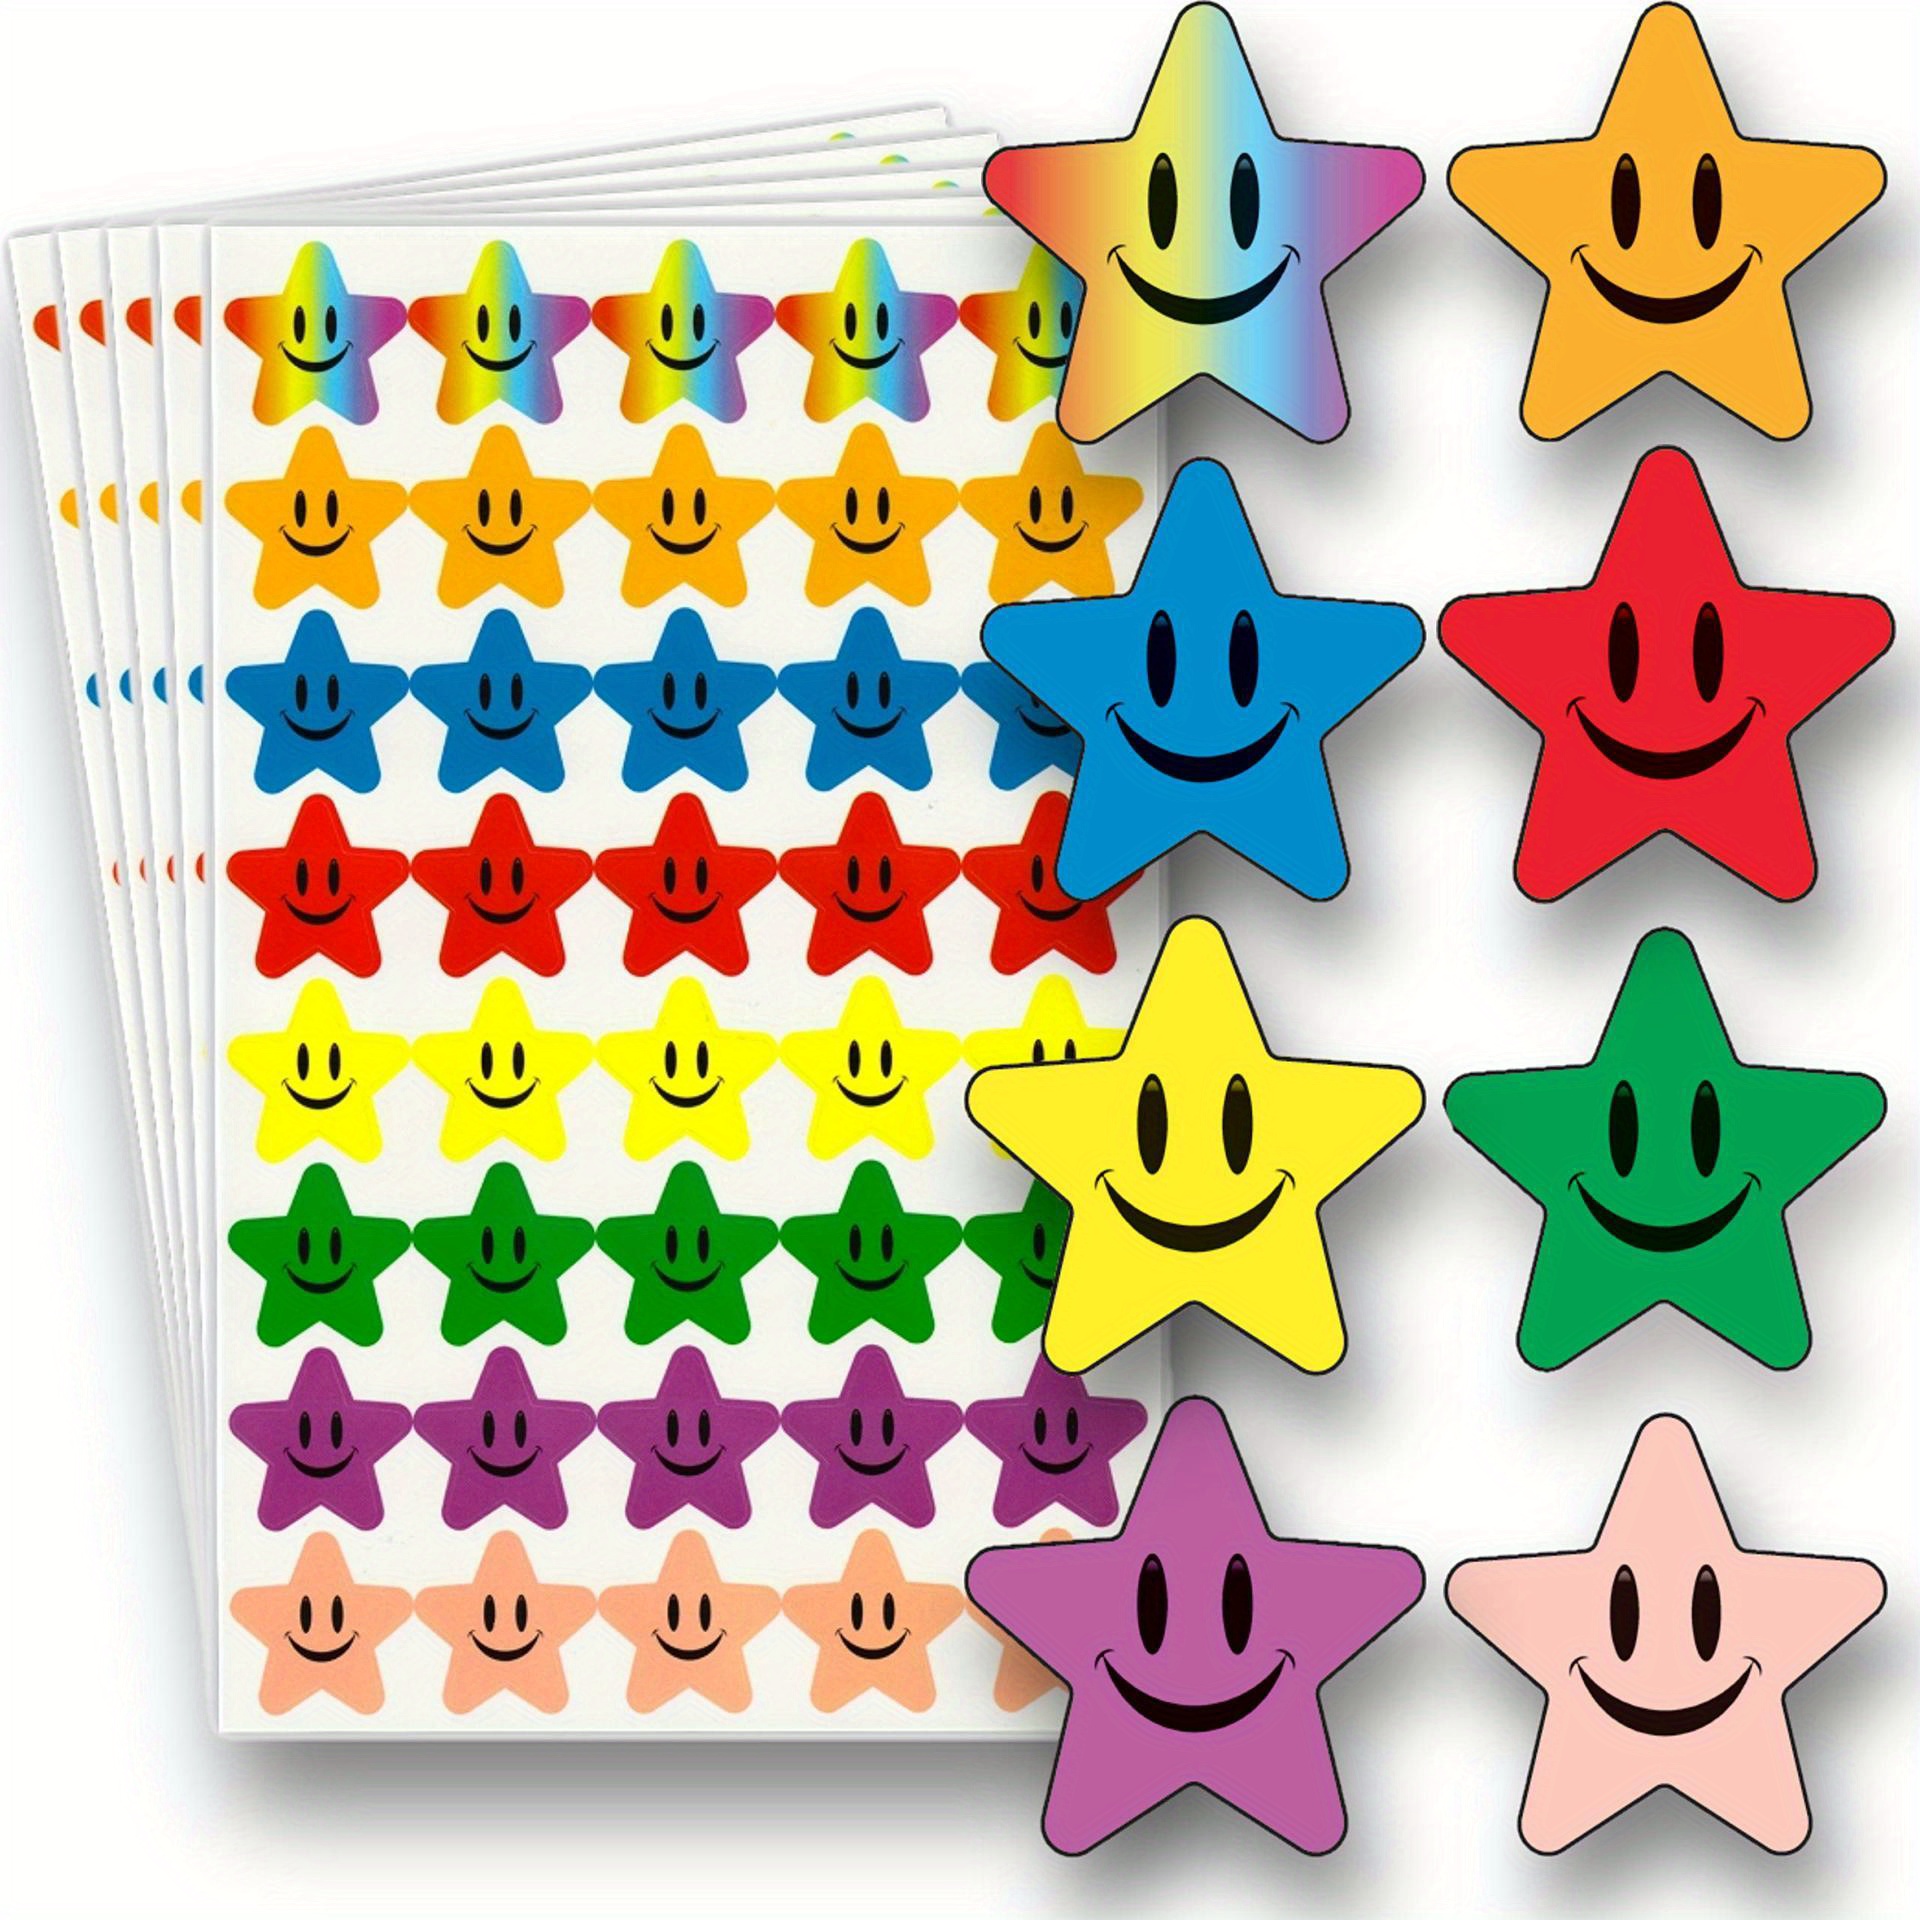 1170pcs Star Shaped Stickers For Student Behavior Chart